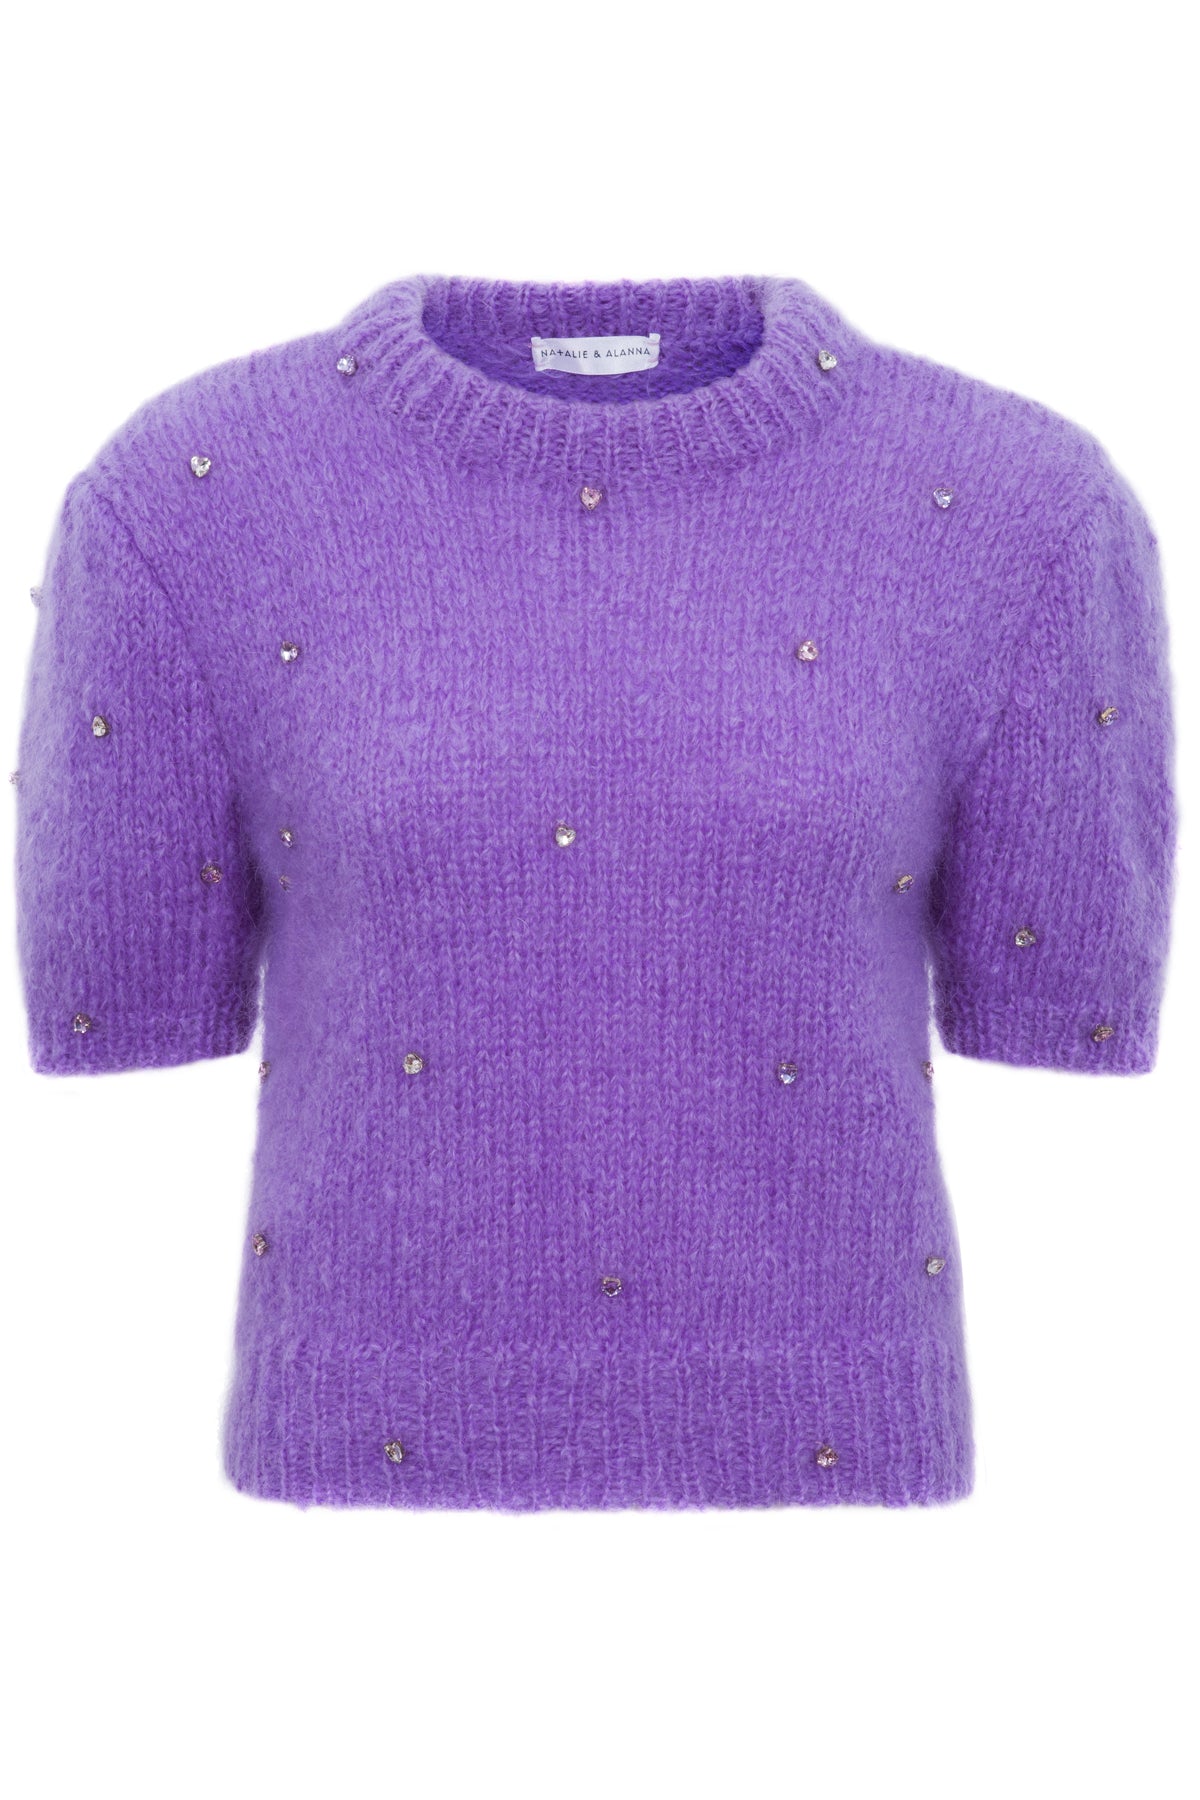 Alice Lilac Hand-Knit Mohair Jumper with Crystal Heart Embellishments- Made to Order